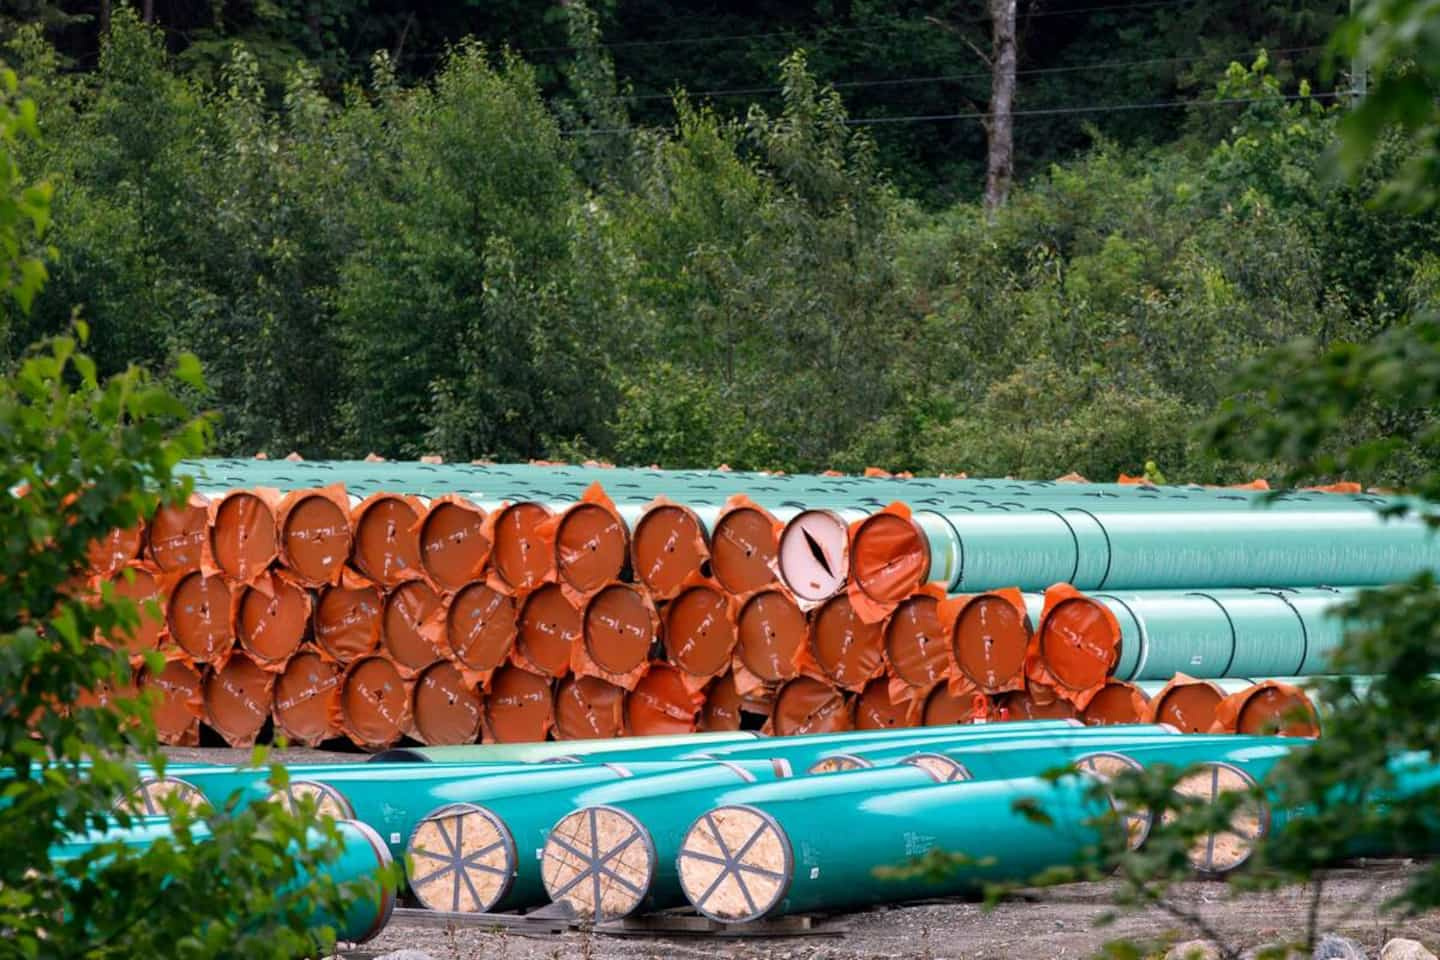 The controversial Trans Mountain pipeline, a financial “loss” for Canada